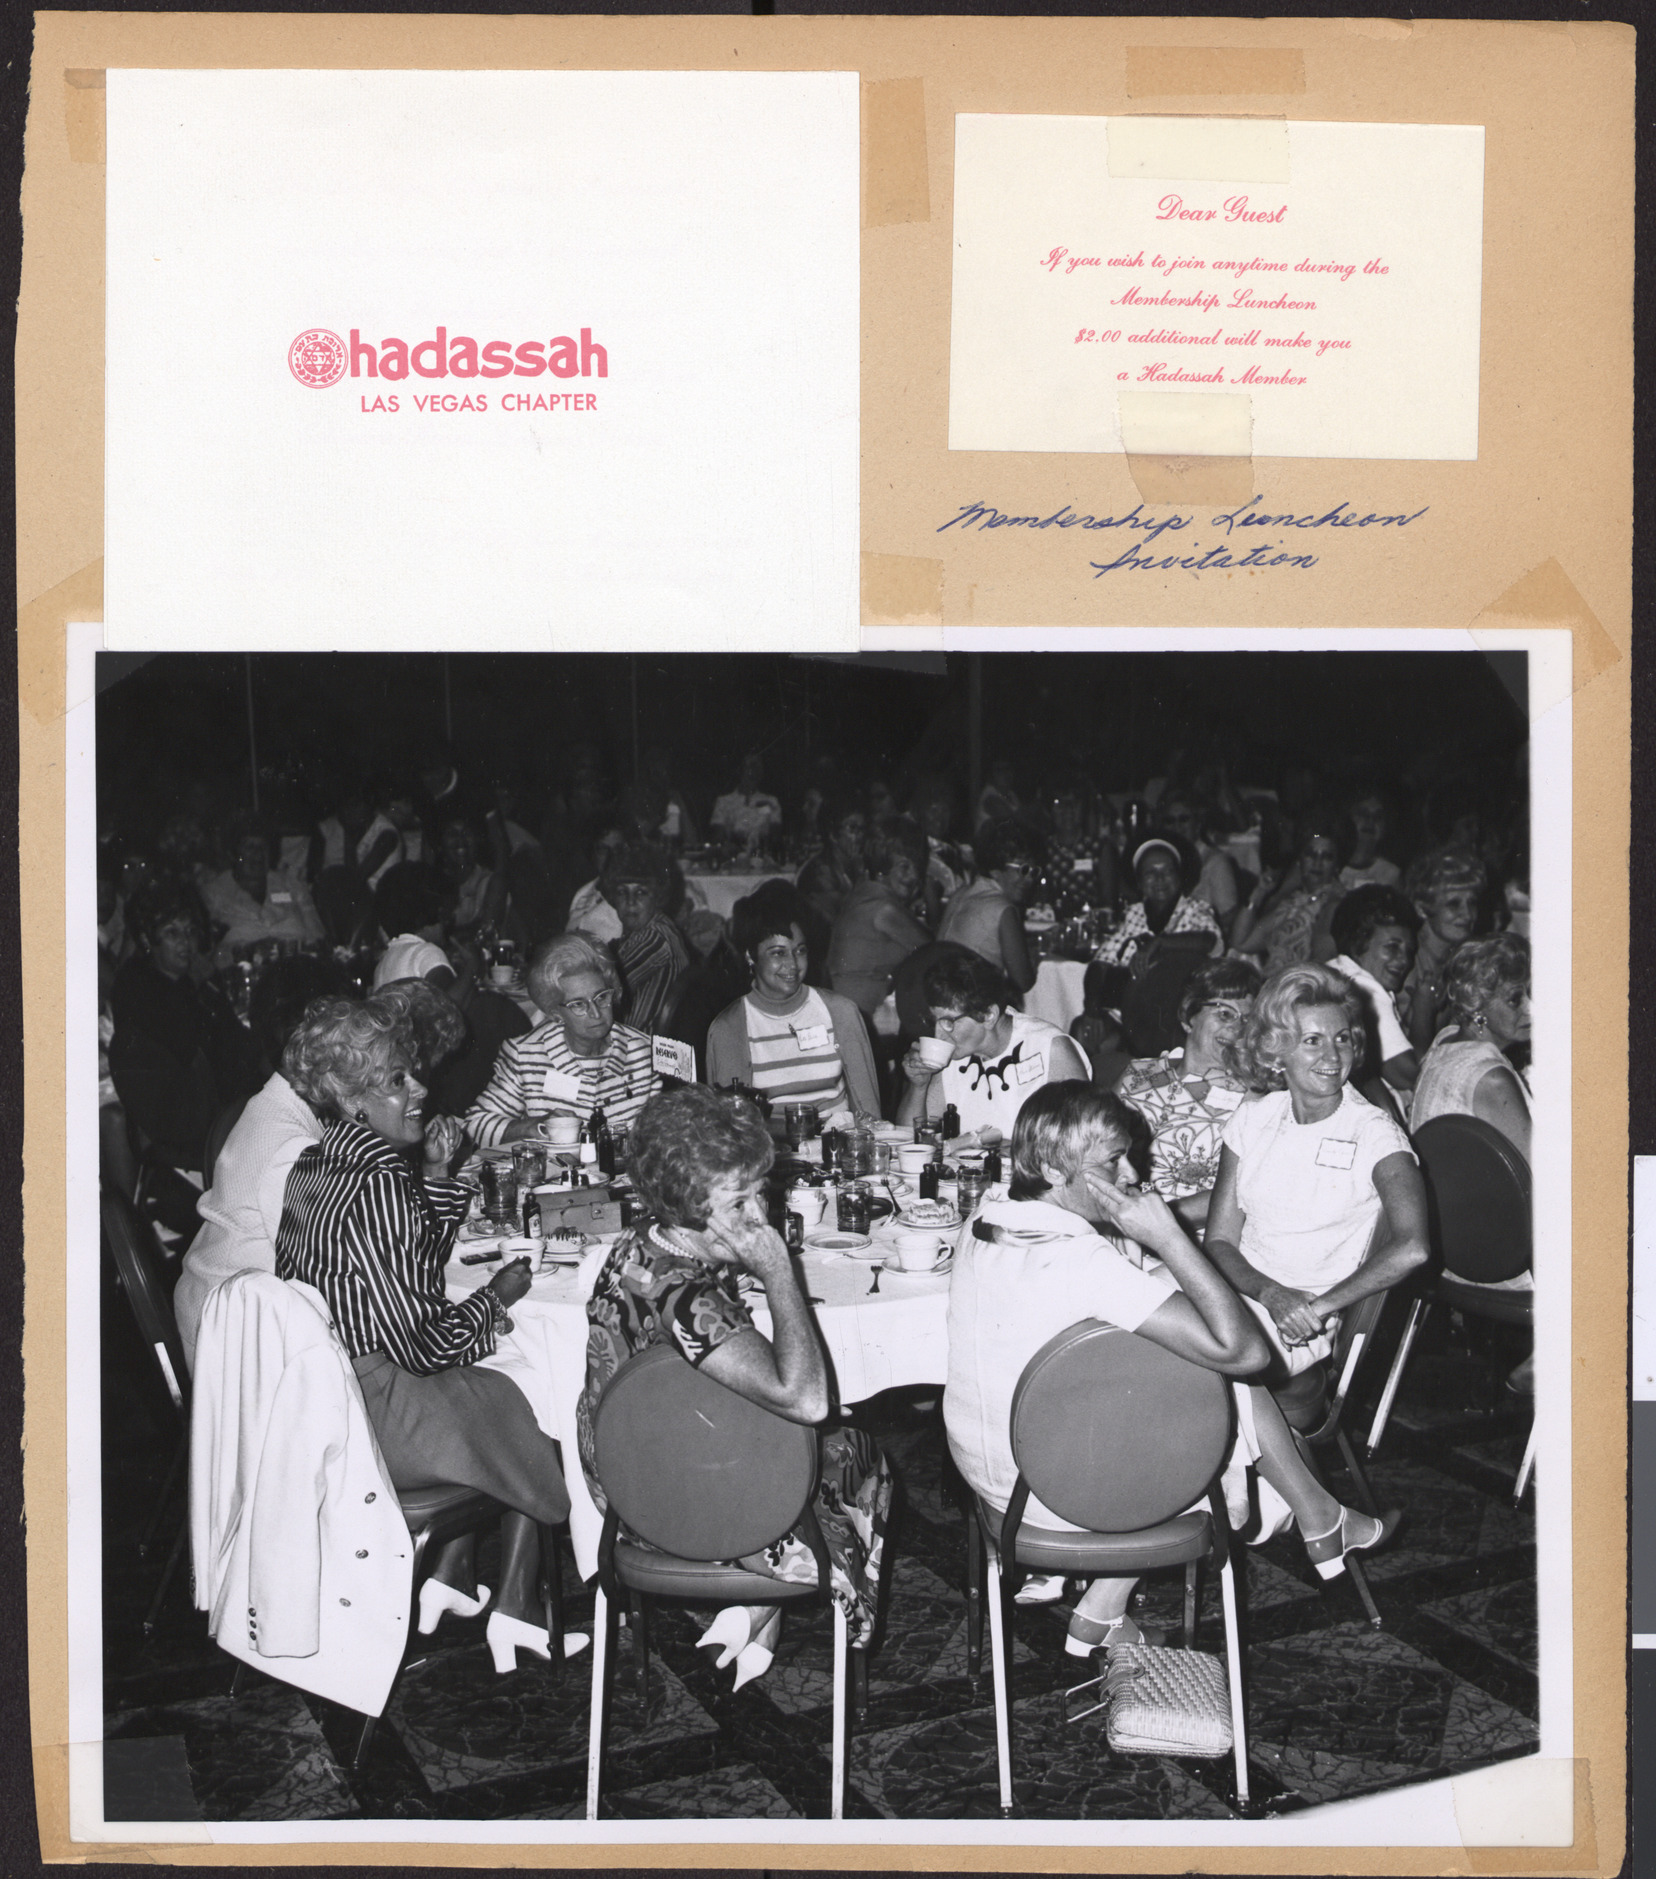 Invitation, guest card and photograph of Hadassah membership luncheon